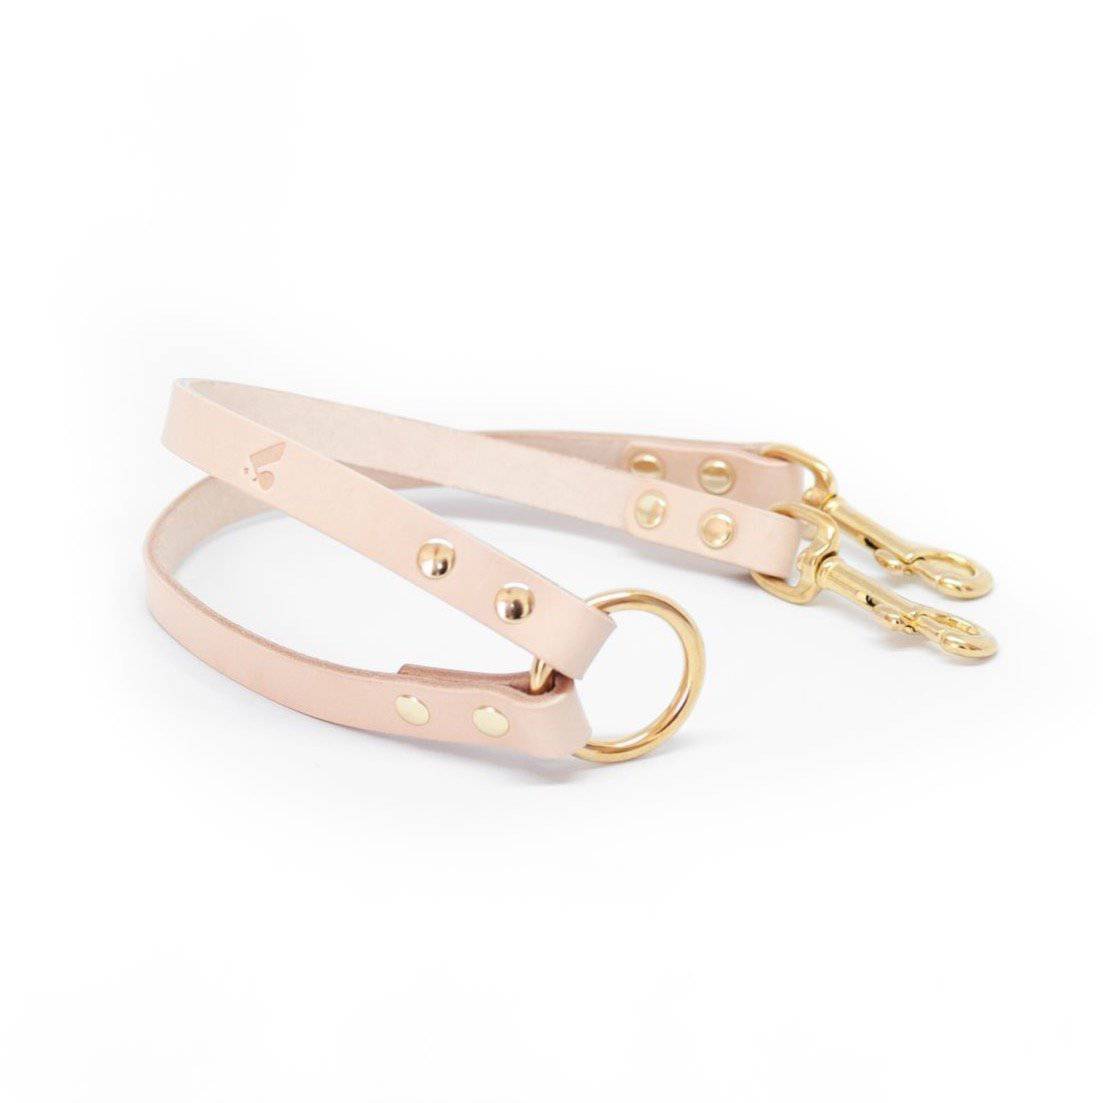 Nude - Leather Twin Lead Extension - Holler Brighton